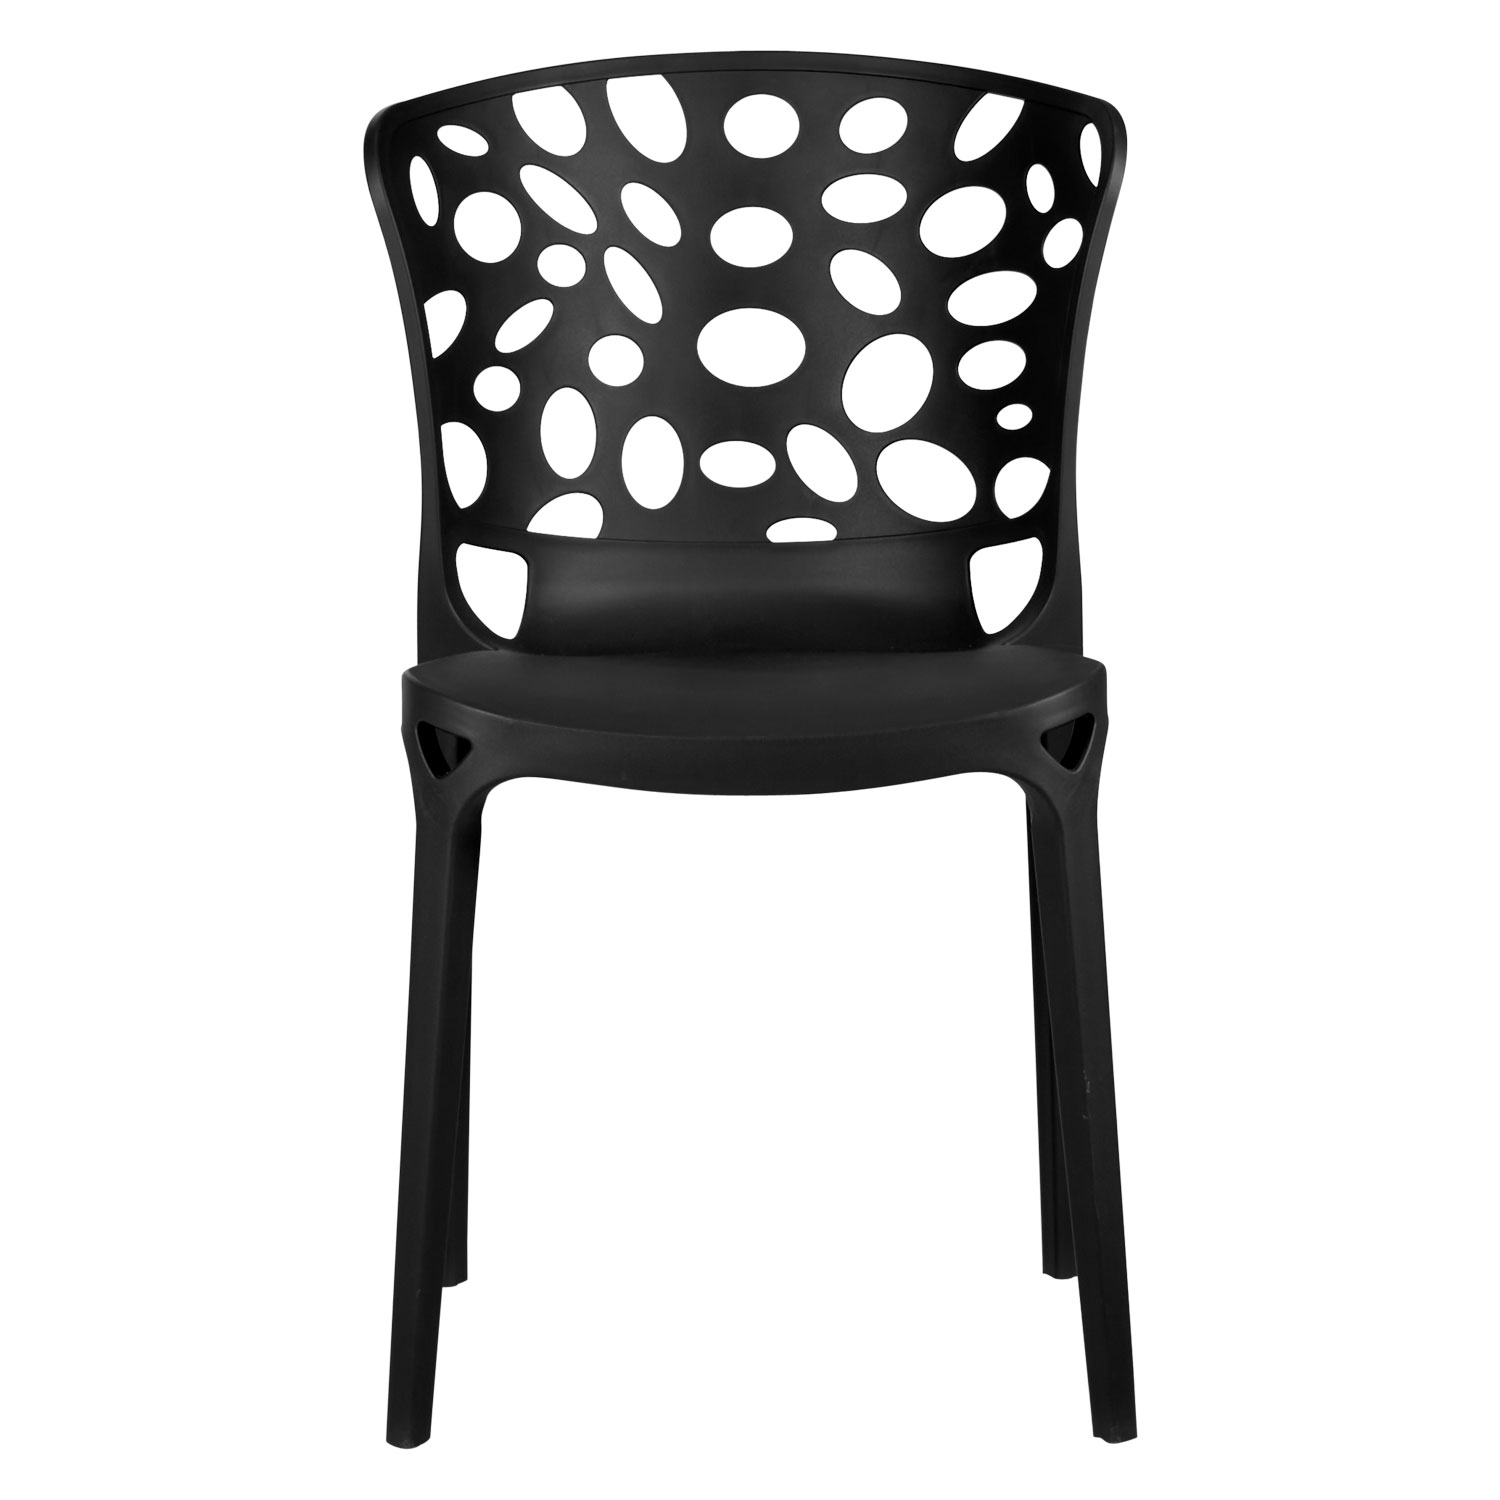 Garden chair Set of 4 Modern Black Camping chairs Outdoor chairs Plastic Stacking chairs Kitchen chairs